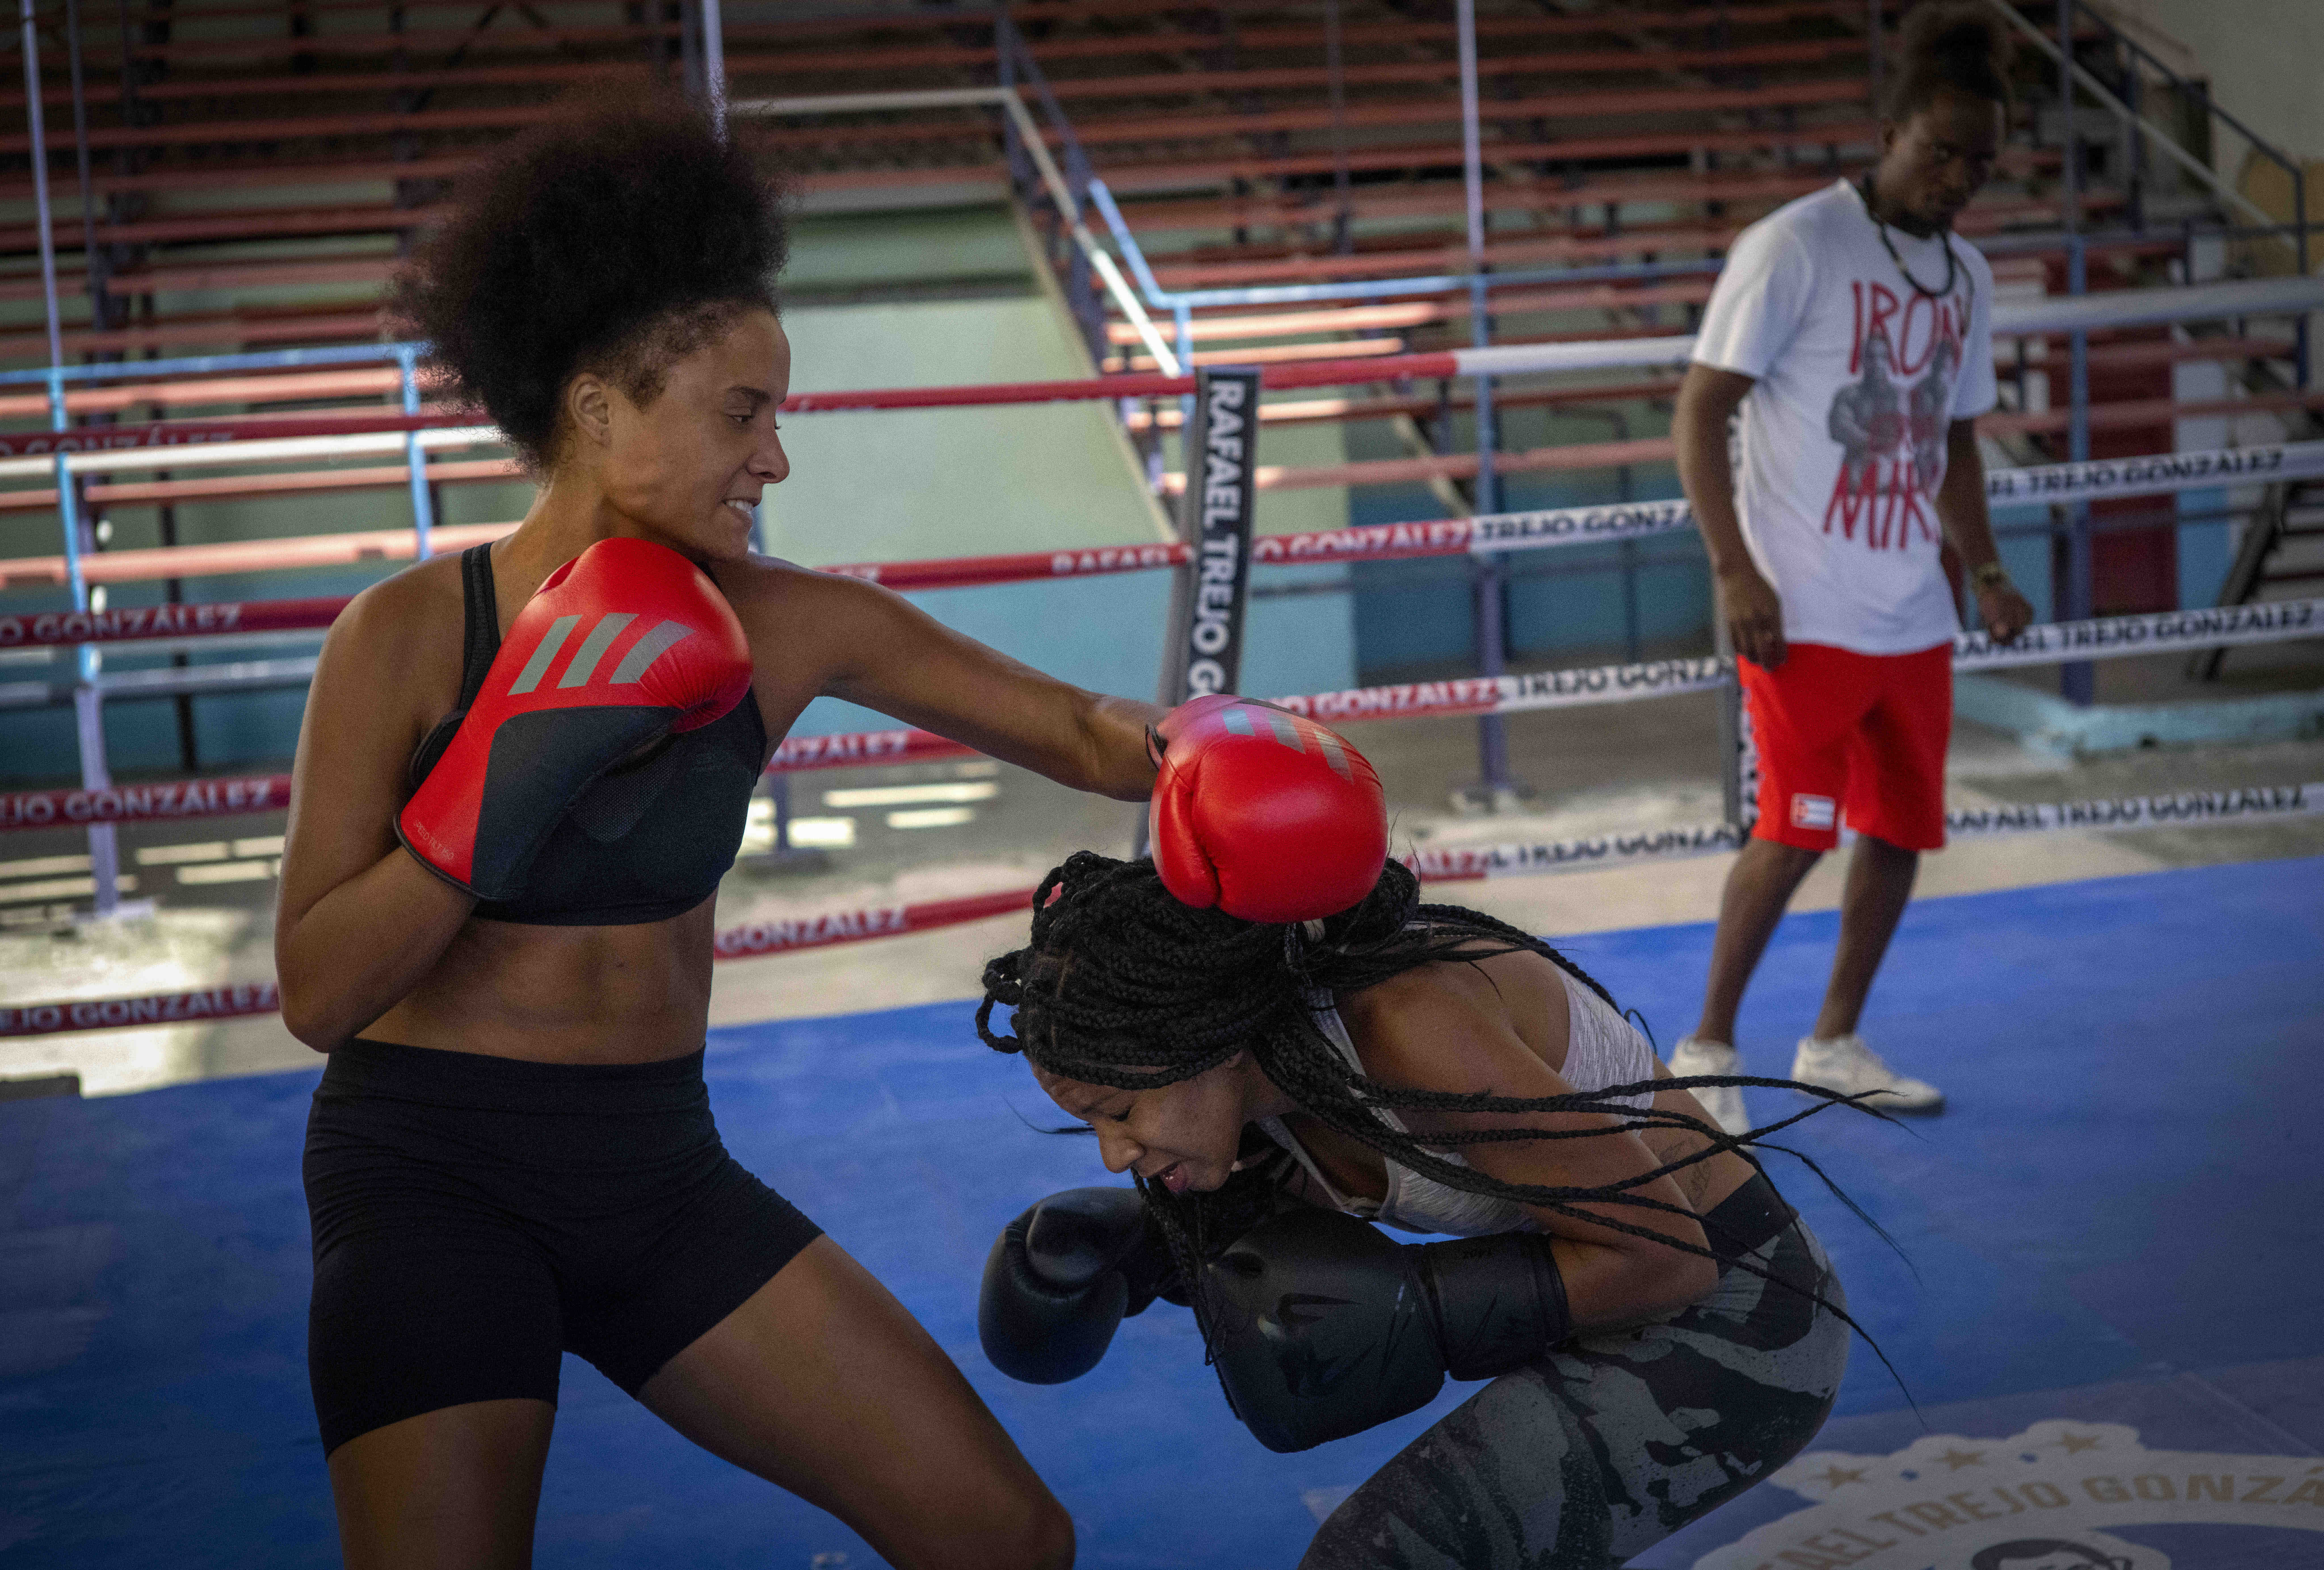 Cuba: Women boxers allowed to compete after rule change - BBC News